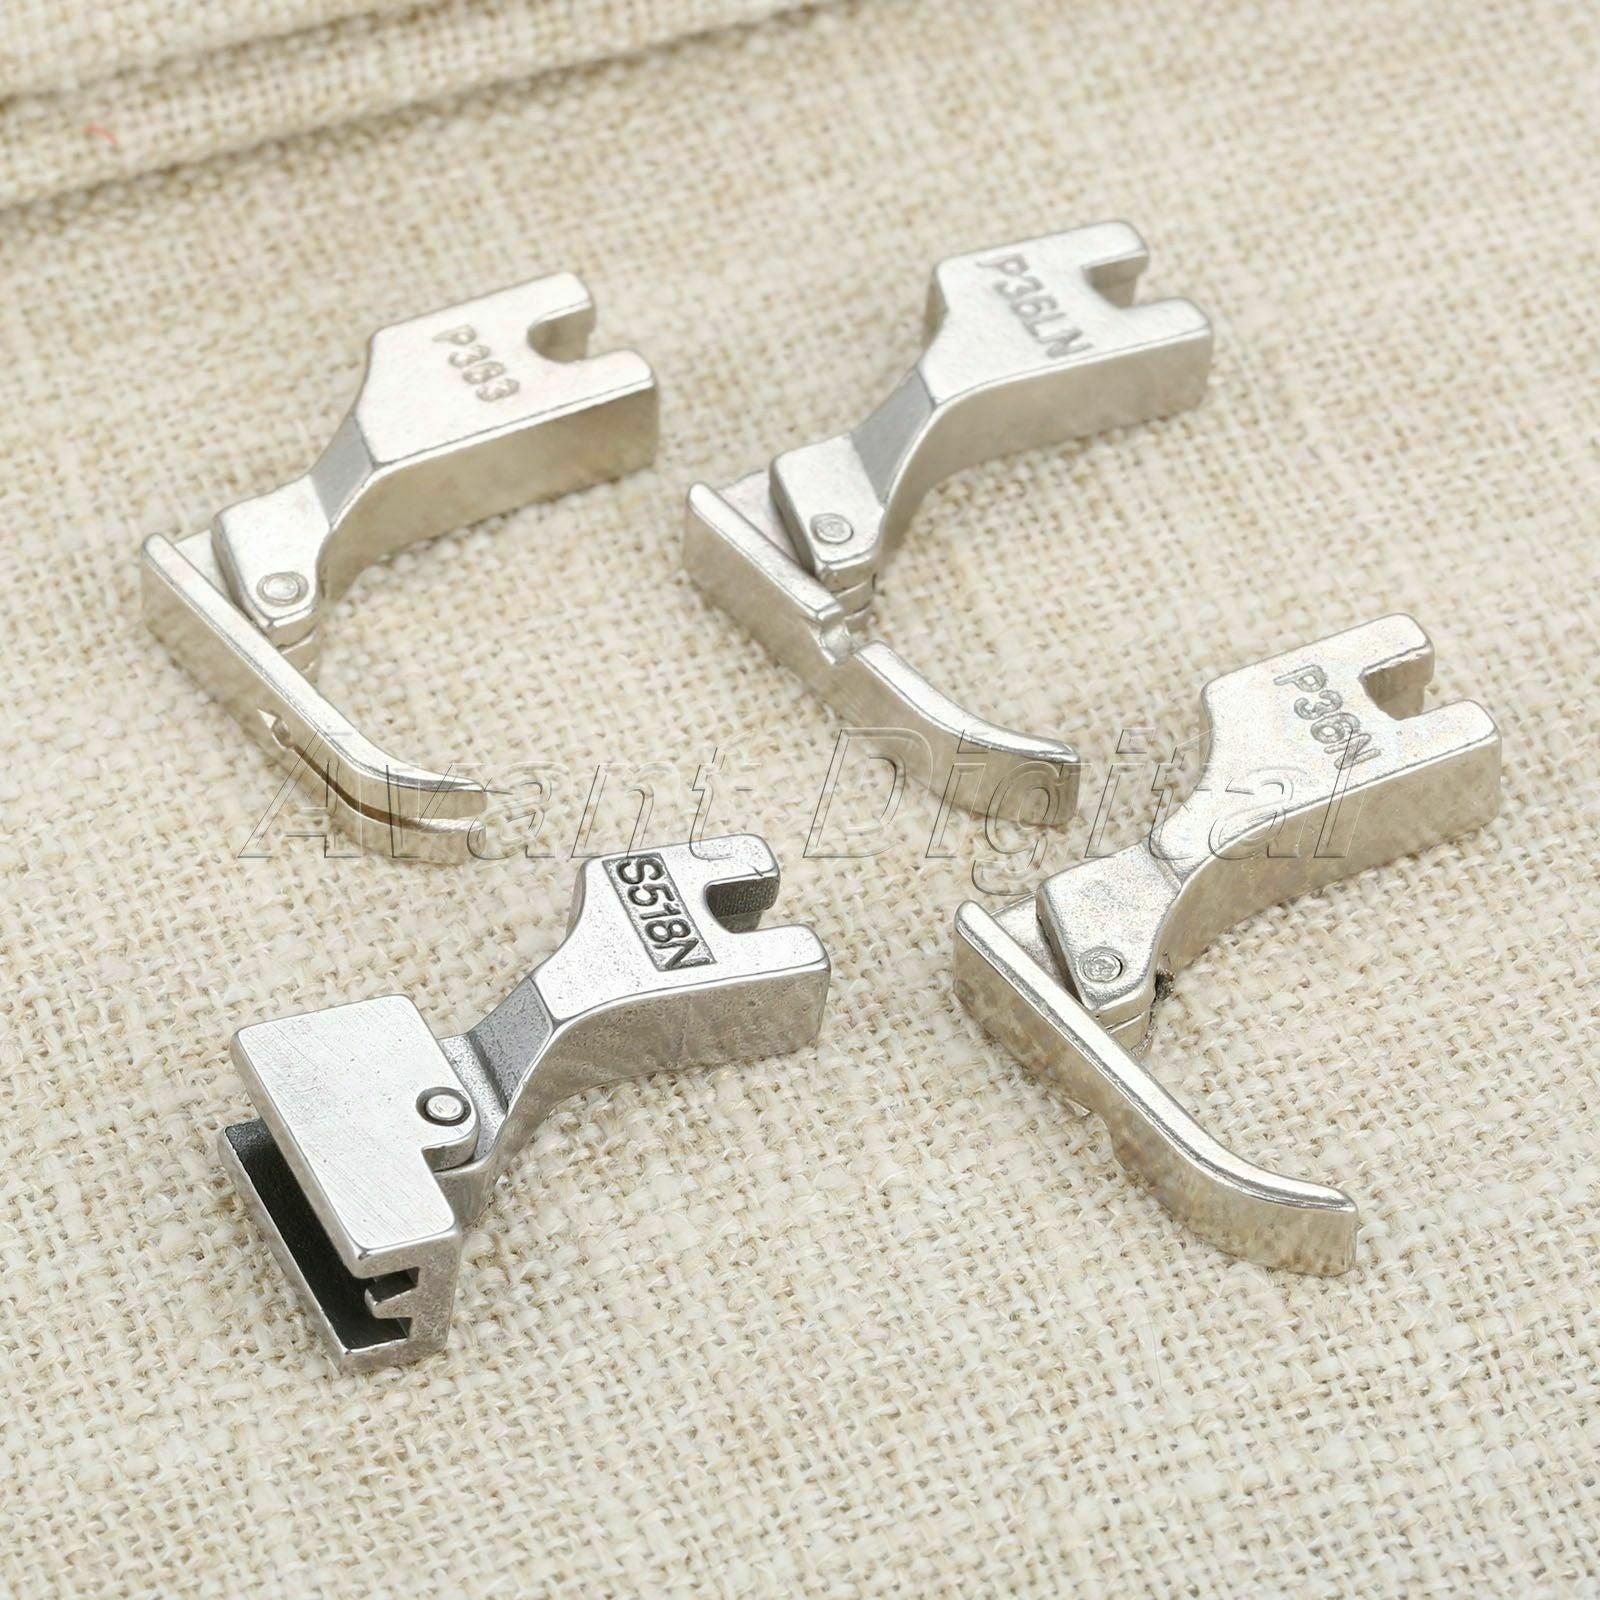 4Pcs/set Zipper Foot Feet For Industrial Single Needle Sewing Machine Spare Part